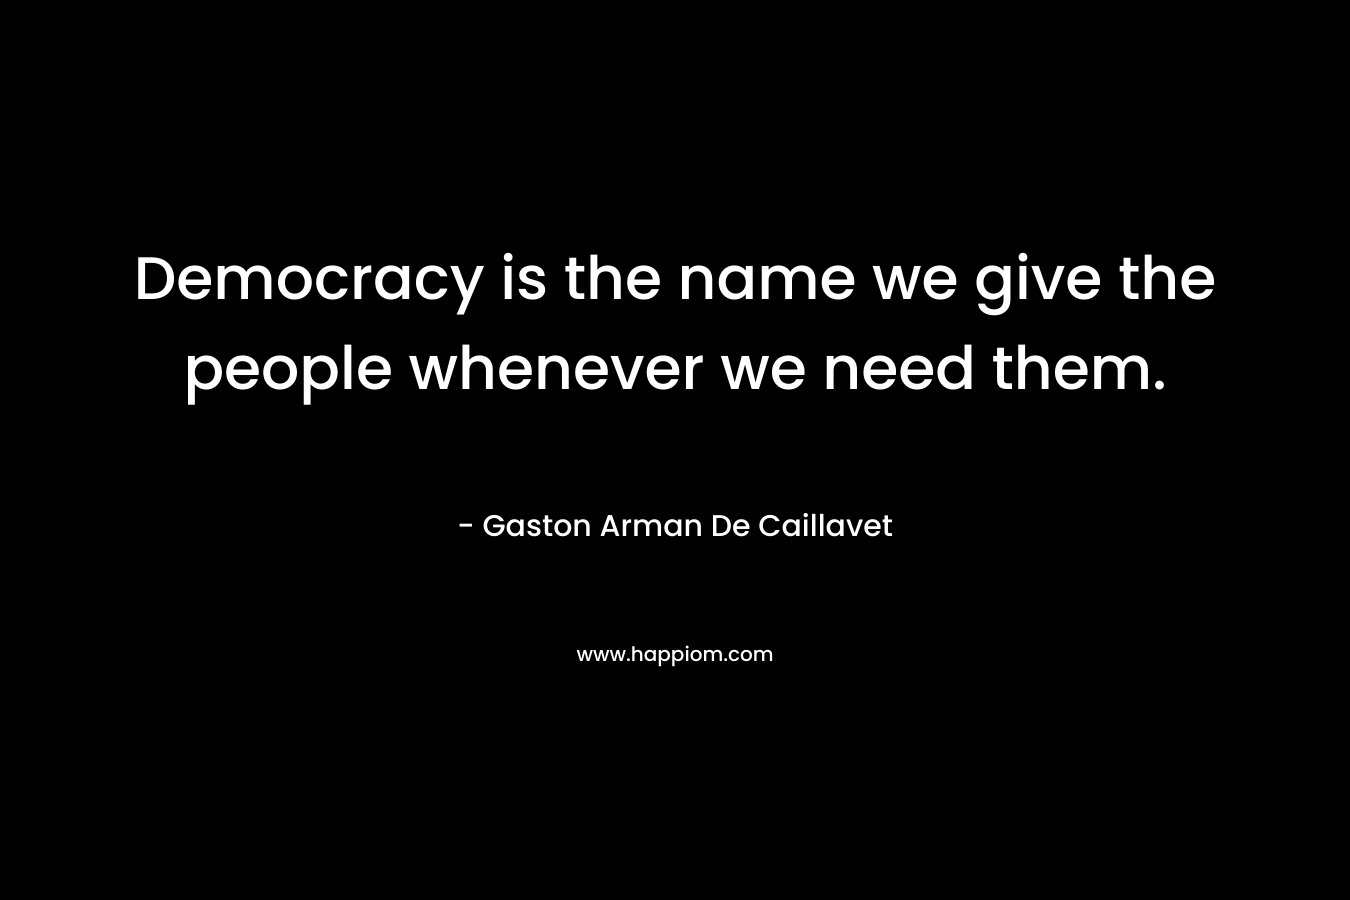 Democracy is the name we give the people whenever we need them.